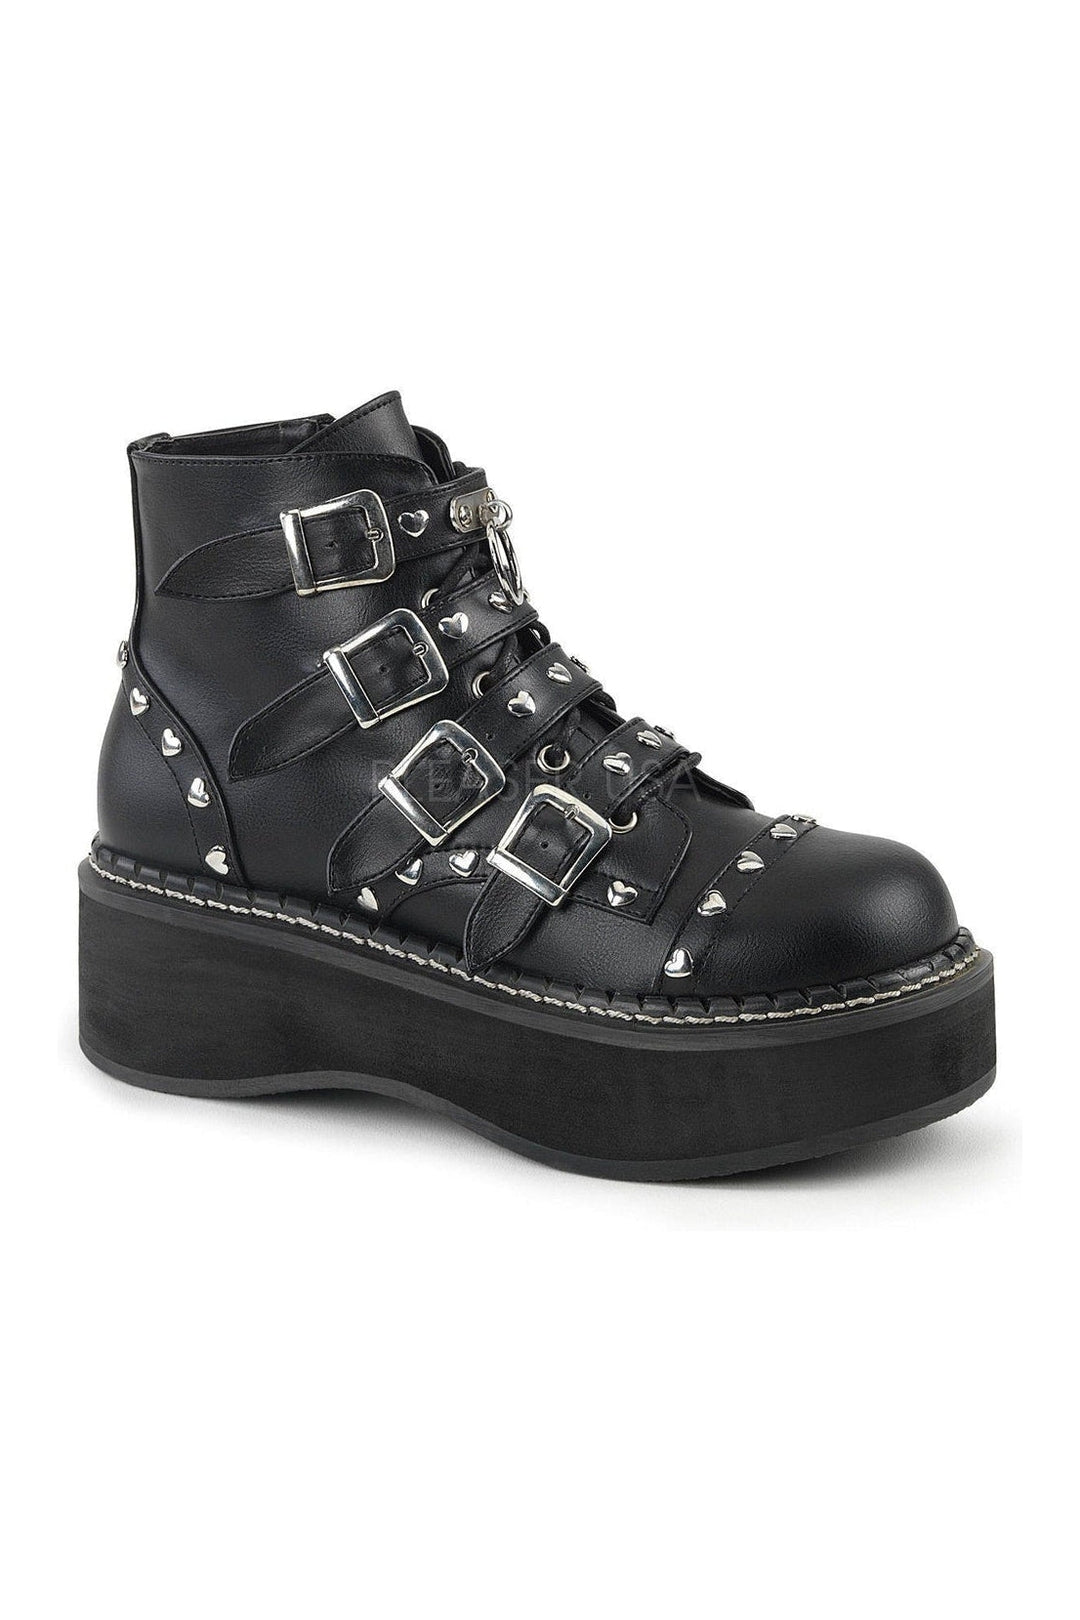 EMILY-315 Demonia Ankle Boot | Black Faux Leather-Demonia-Black-Ankle Boots-SEXYSHOES.COM